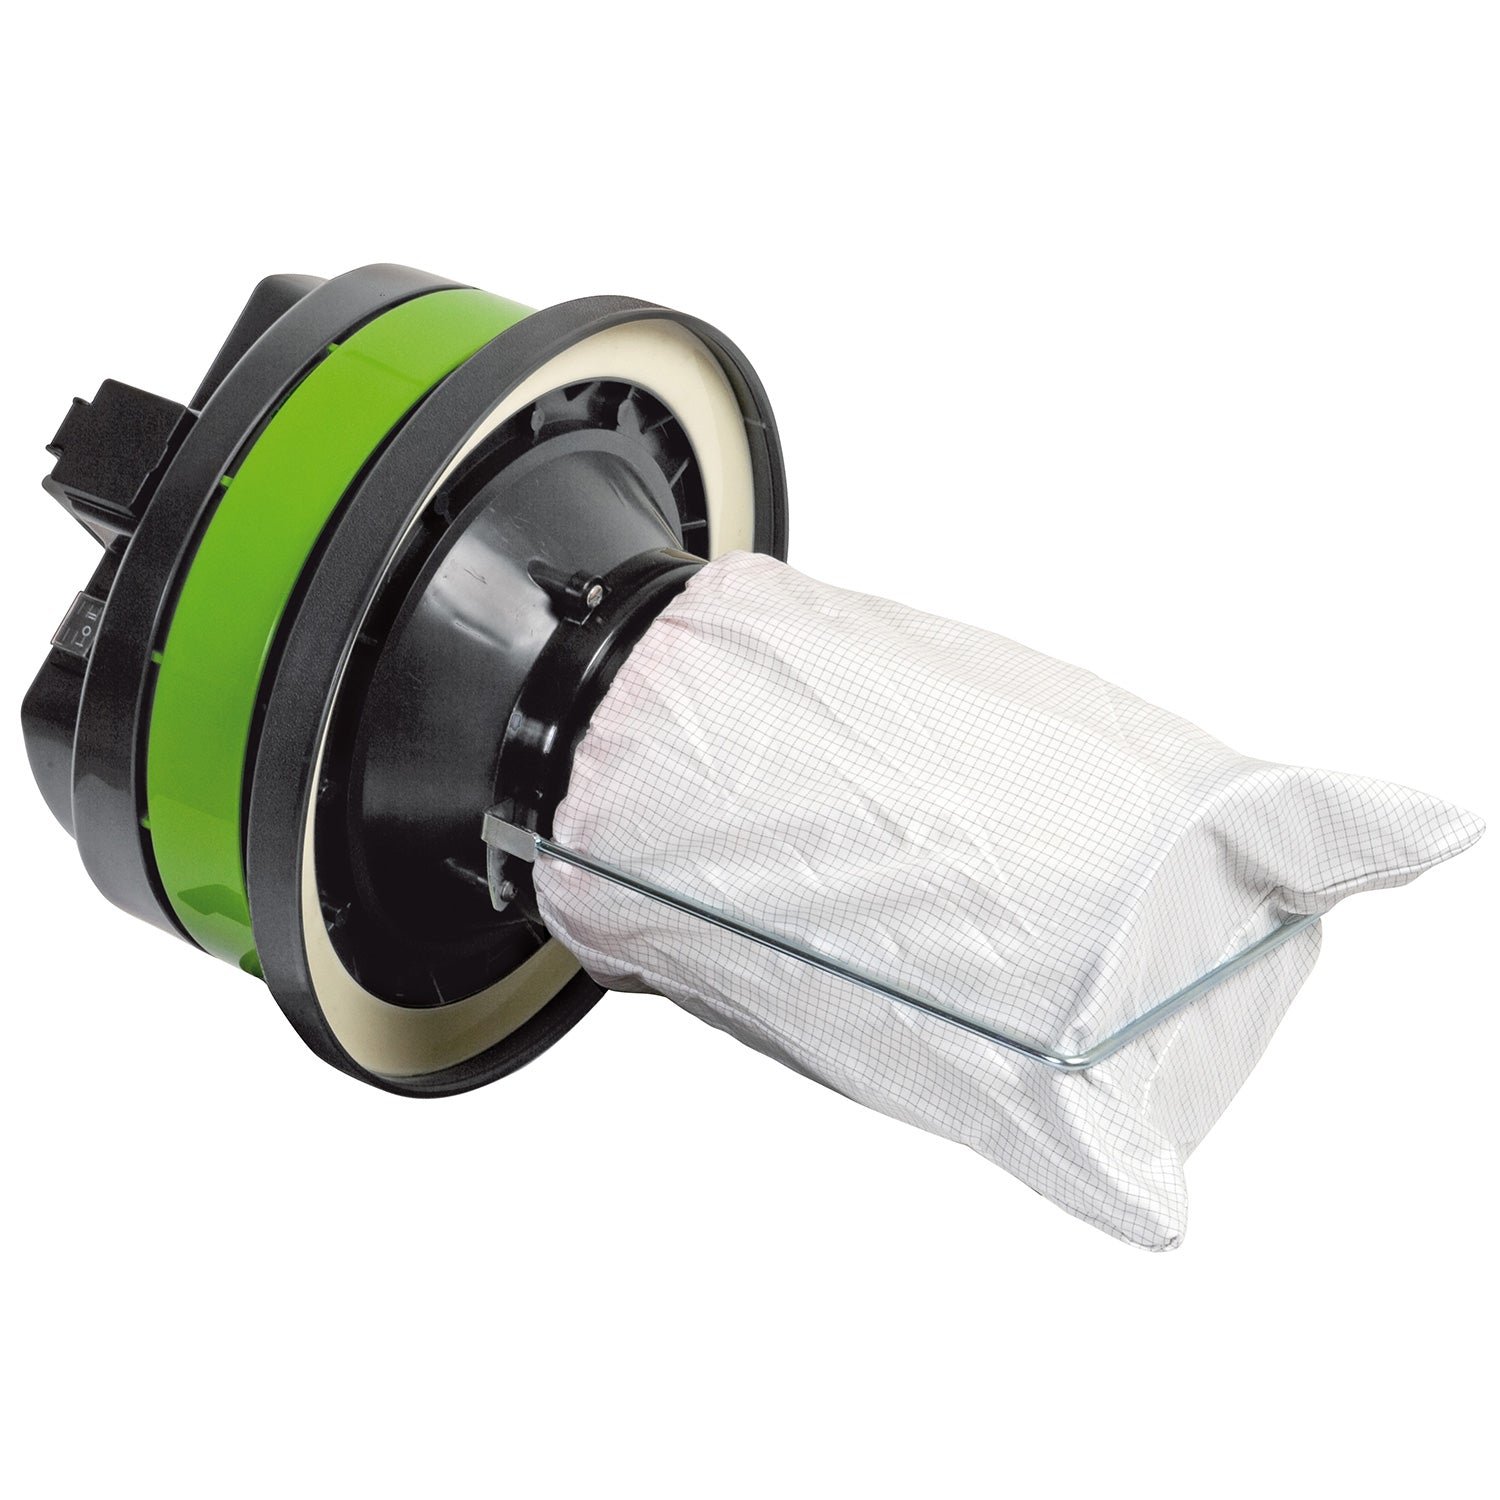 IPC Eagle S83241 Polyester Filter Bag Assembly for 300 Series Vacuums